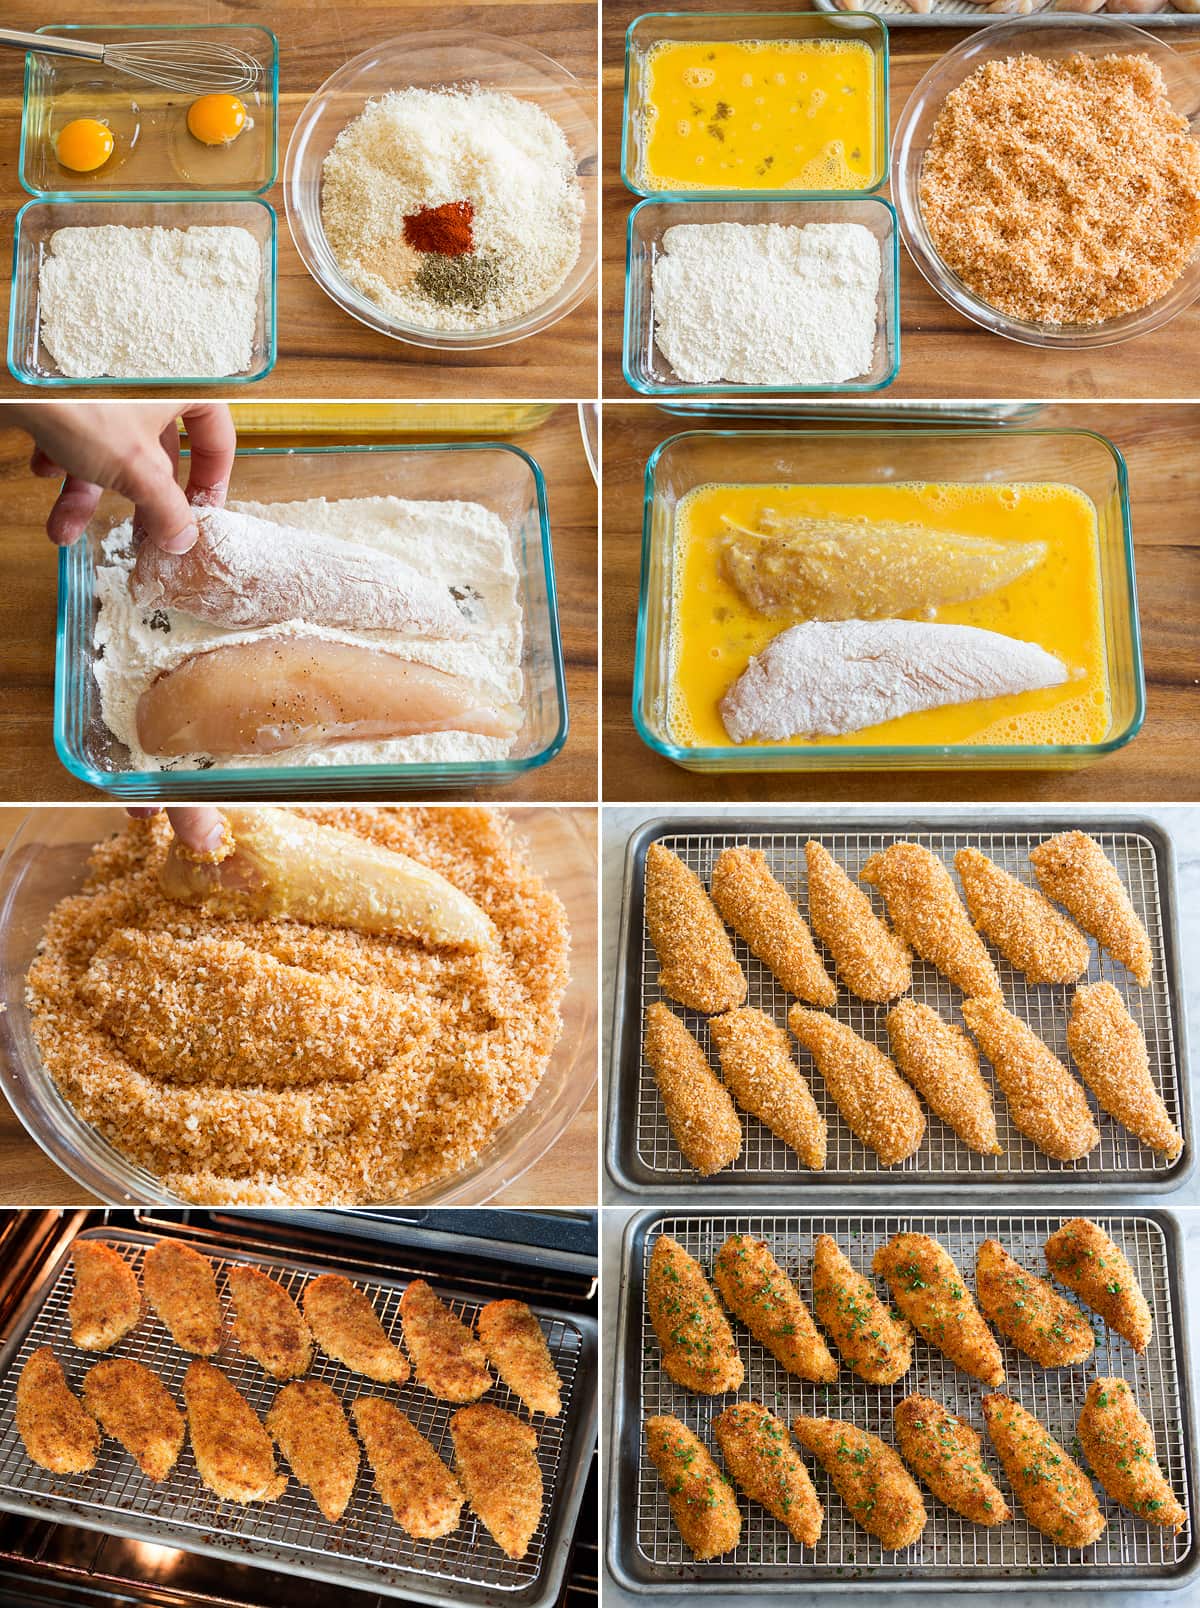 Collage of eight photos showing step by step photos of making baked chicken tenders. Shows dredging chicken in flour, egg and seasoned panko. Then shown baking on a wire rack over a baking sheet.